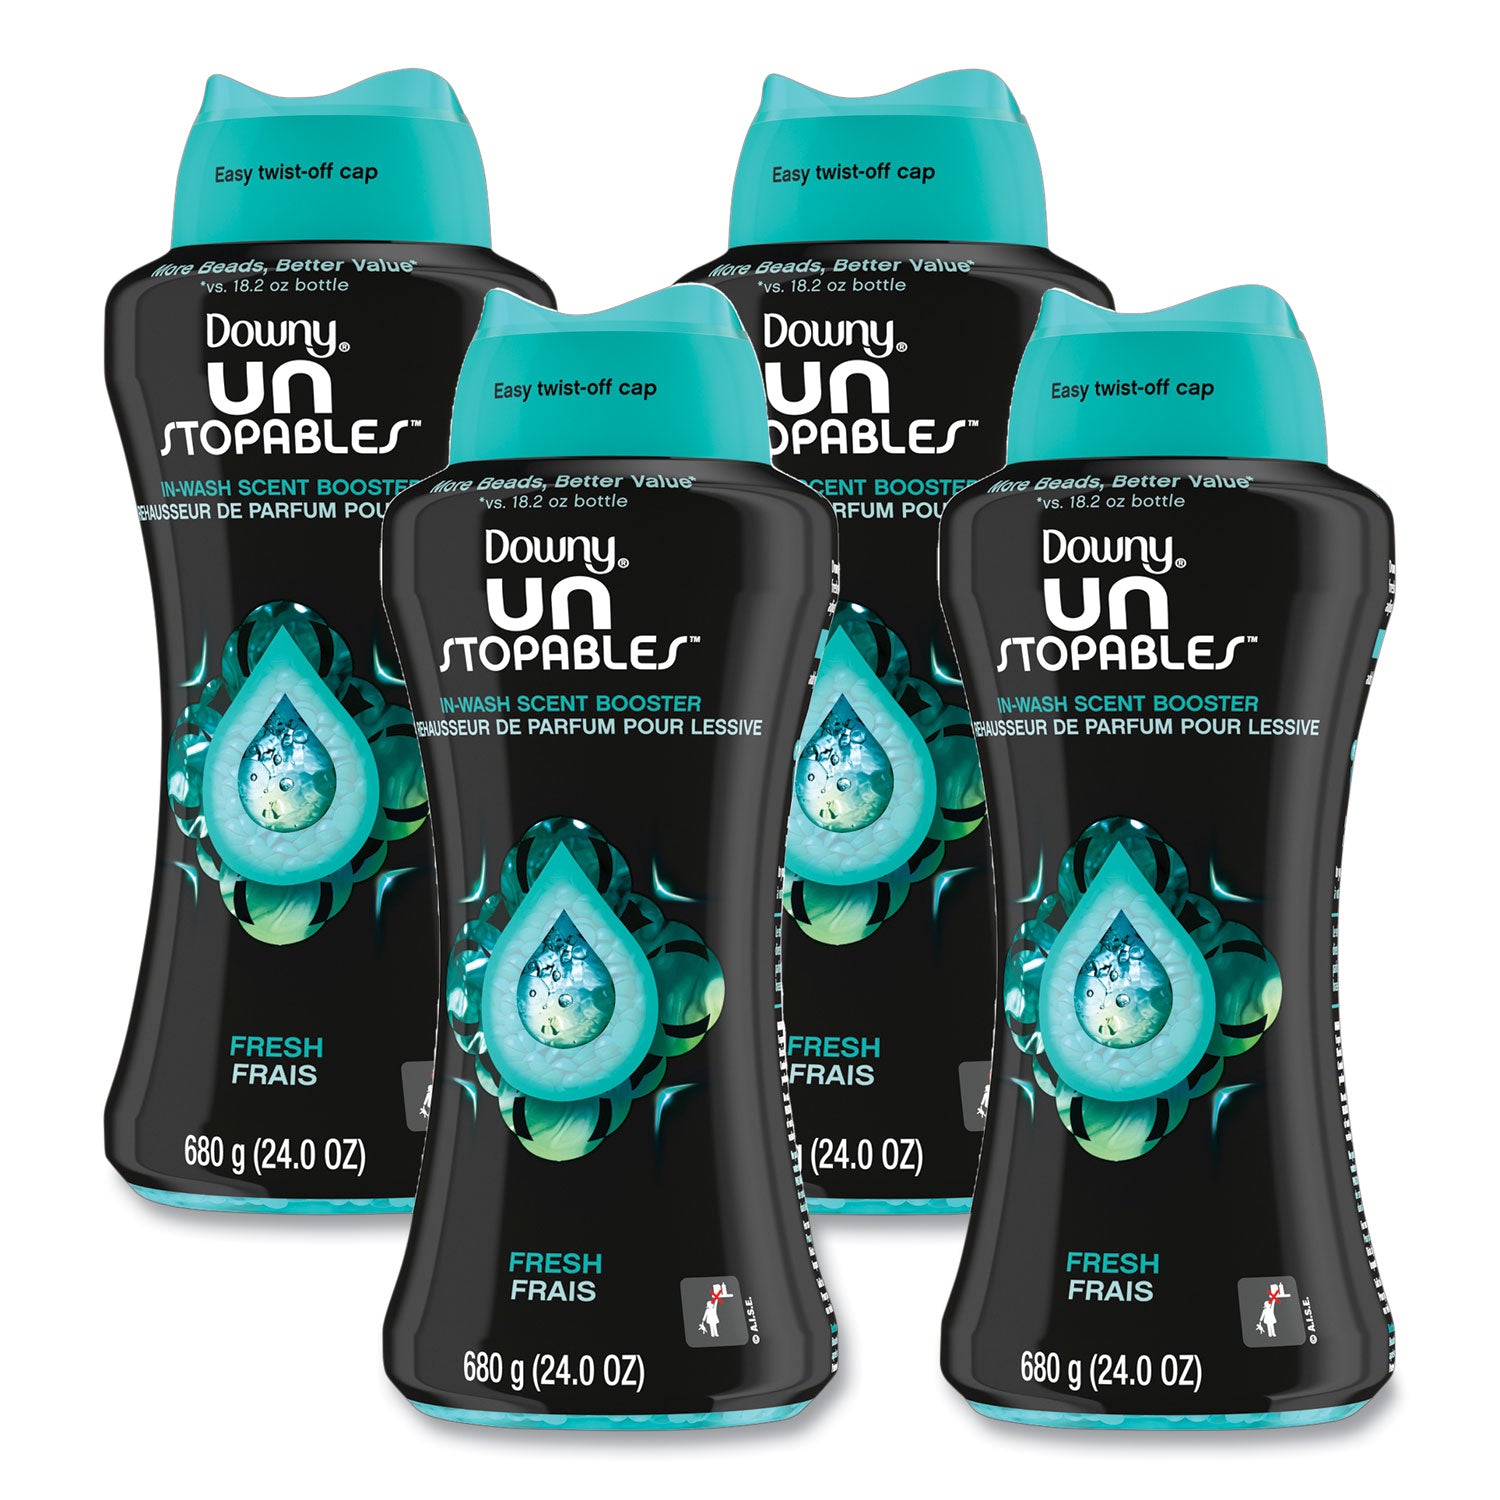 unstopables-in-wash-scent-booster-beads-fresh-scent-24-oz-pour-bottle-4-carton_pgc08726 - 1